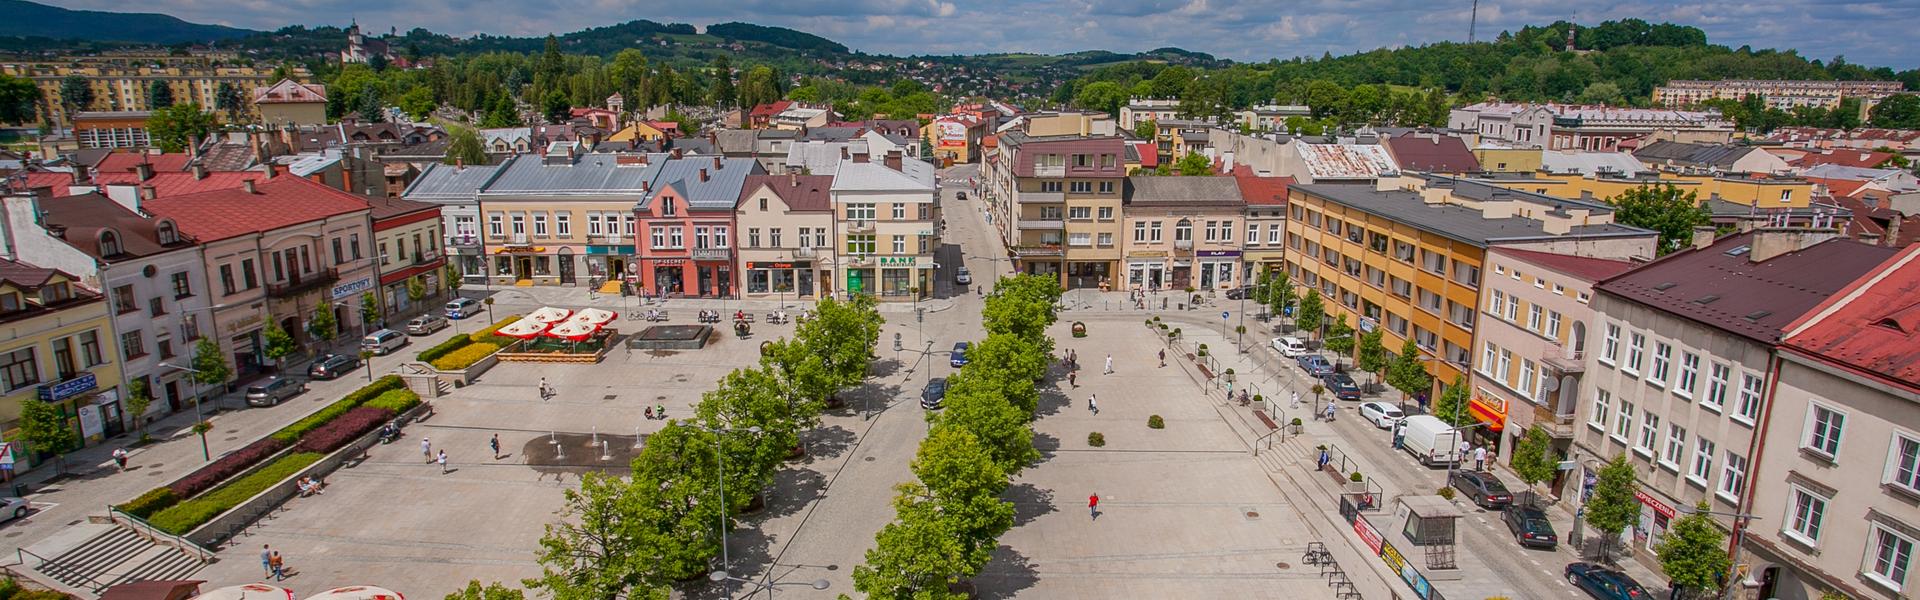 Gorlice Market Square, bird’s eye view of townhouses, square and tree-lined avenues.